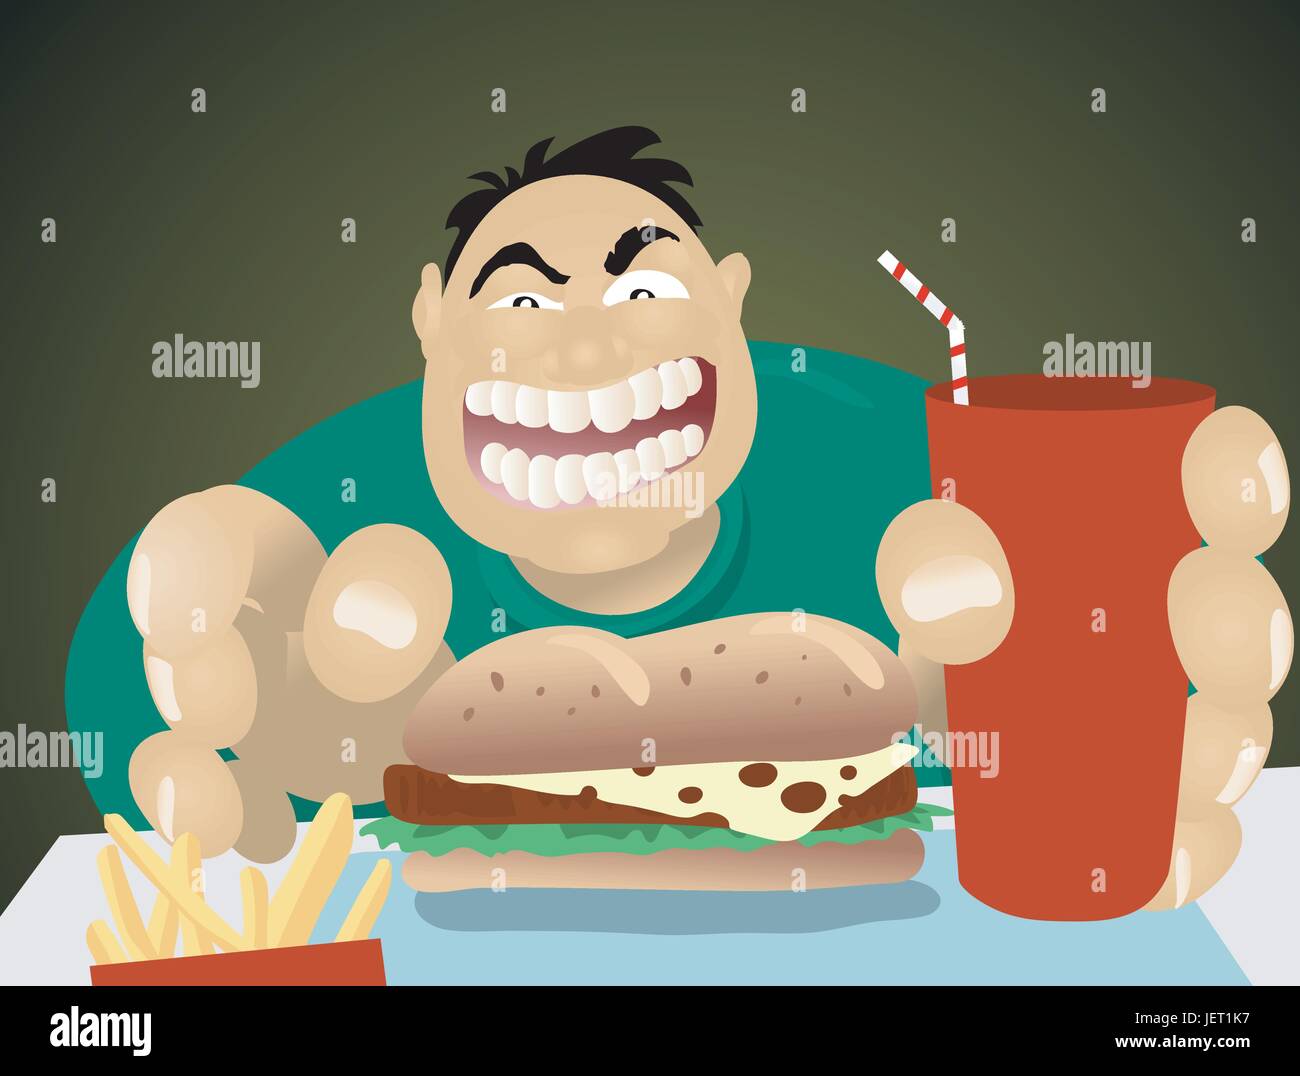 hungry, cheeseburger, thick, wide, fat, obesity, man, restaurant, food, Stock Vector